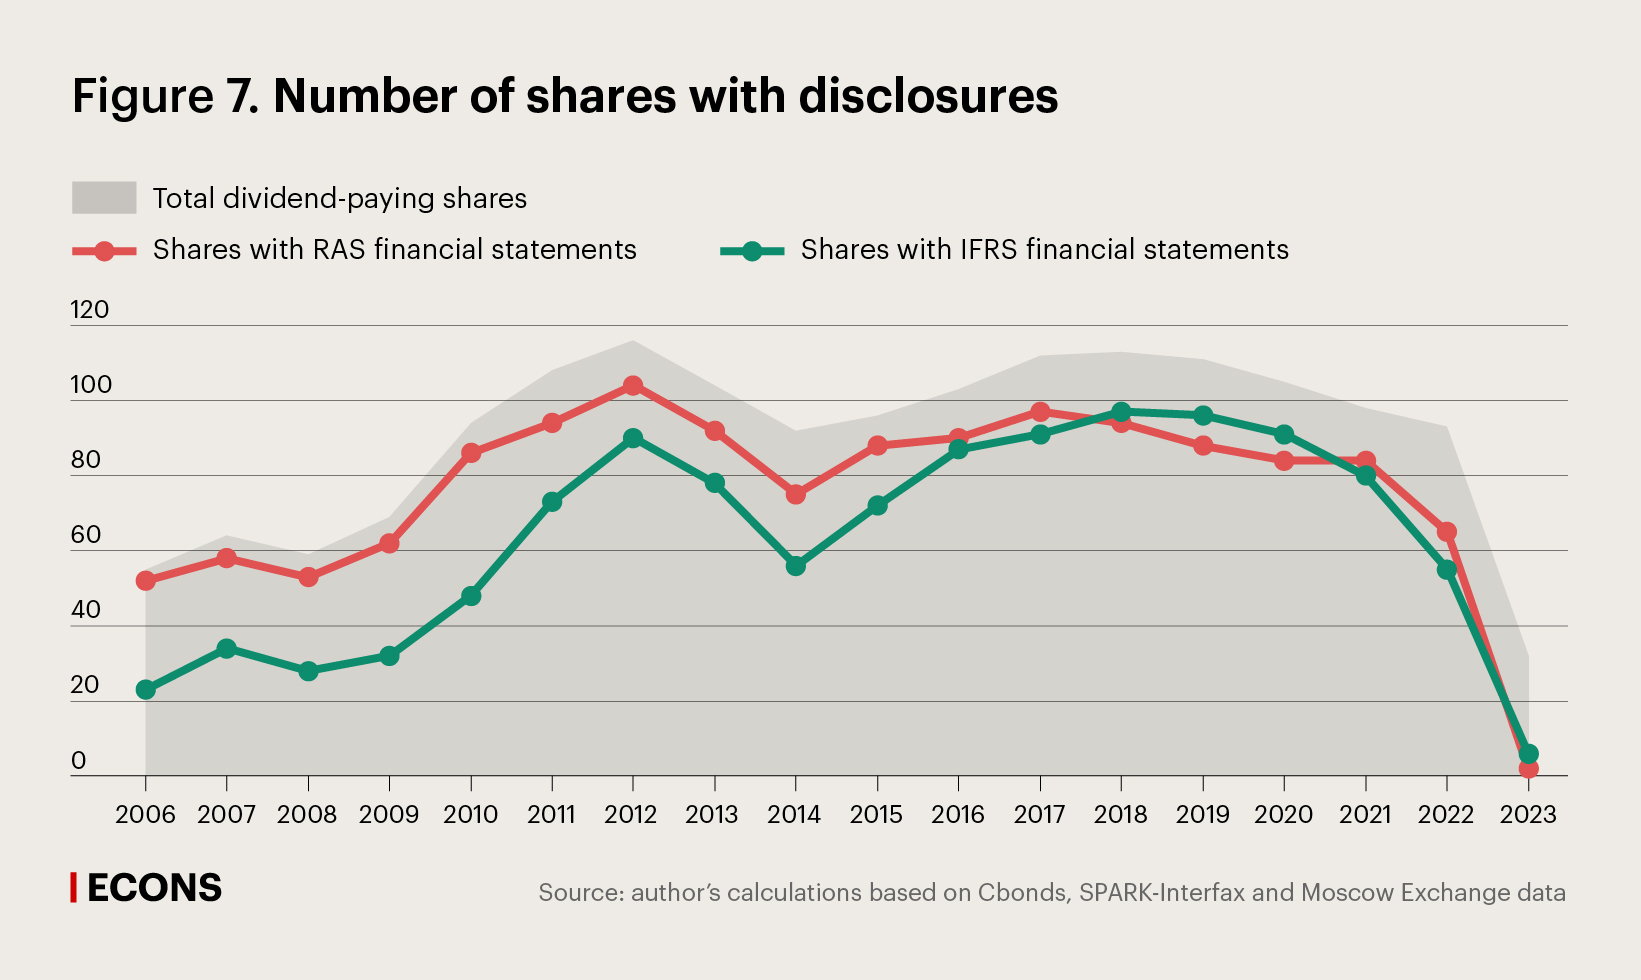 Number of shares with disclosures